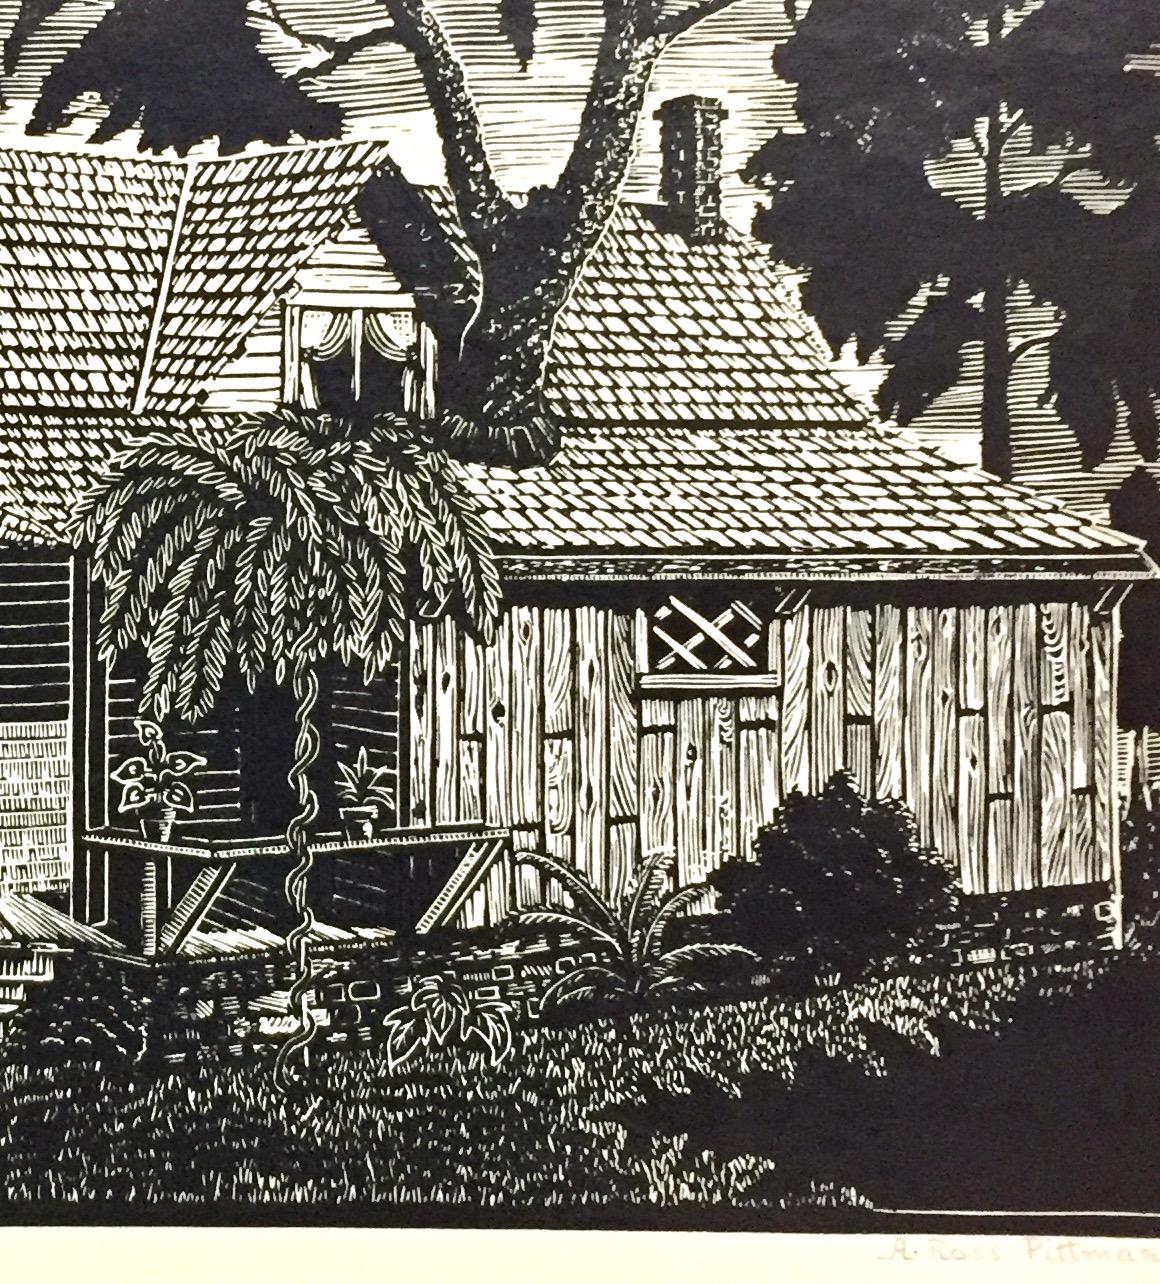 This print is signed and titled in pencil. A native of Tennessee and a physician, Pittman began to make prints in 1936 in Trenton, New Jersey. However, scene of his home state remained his primary subject.